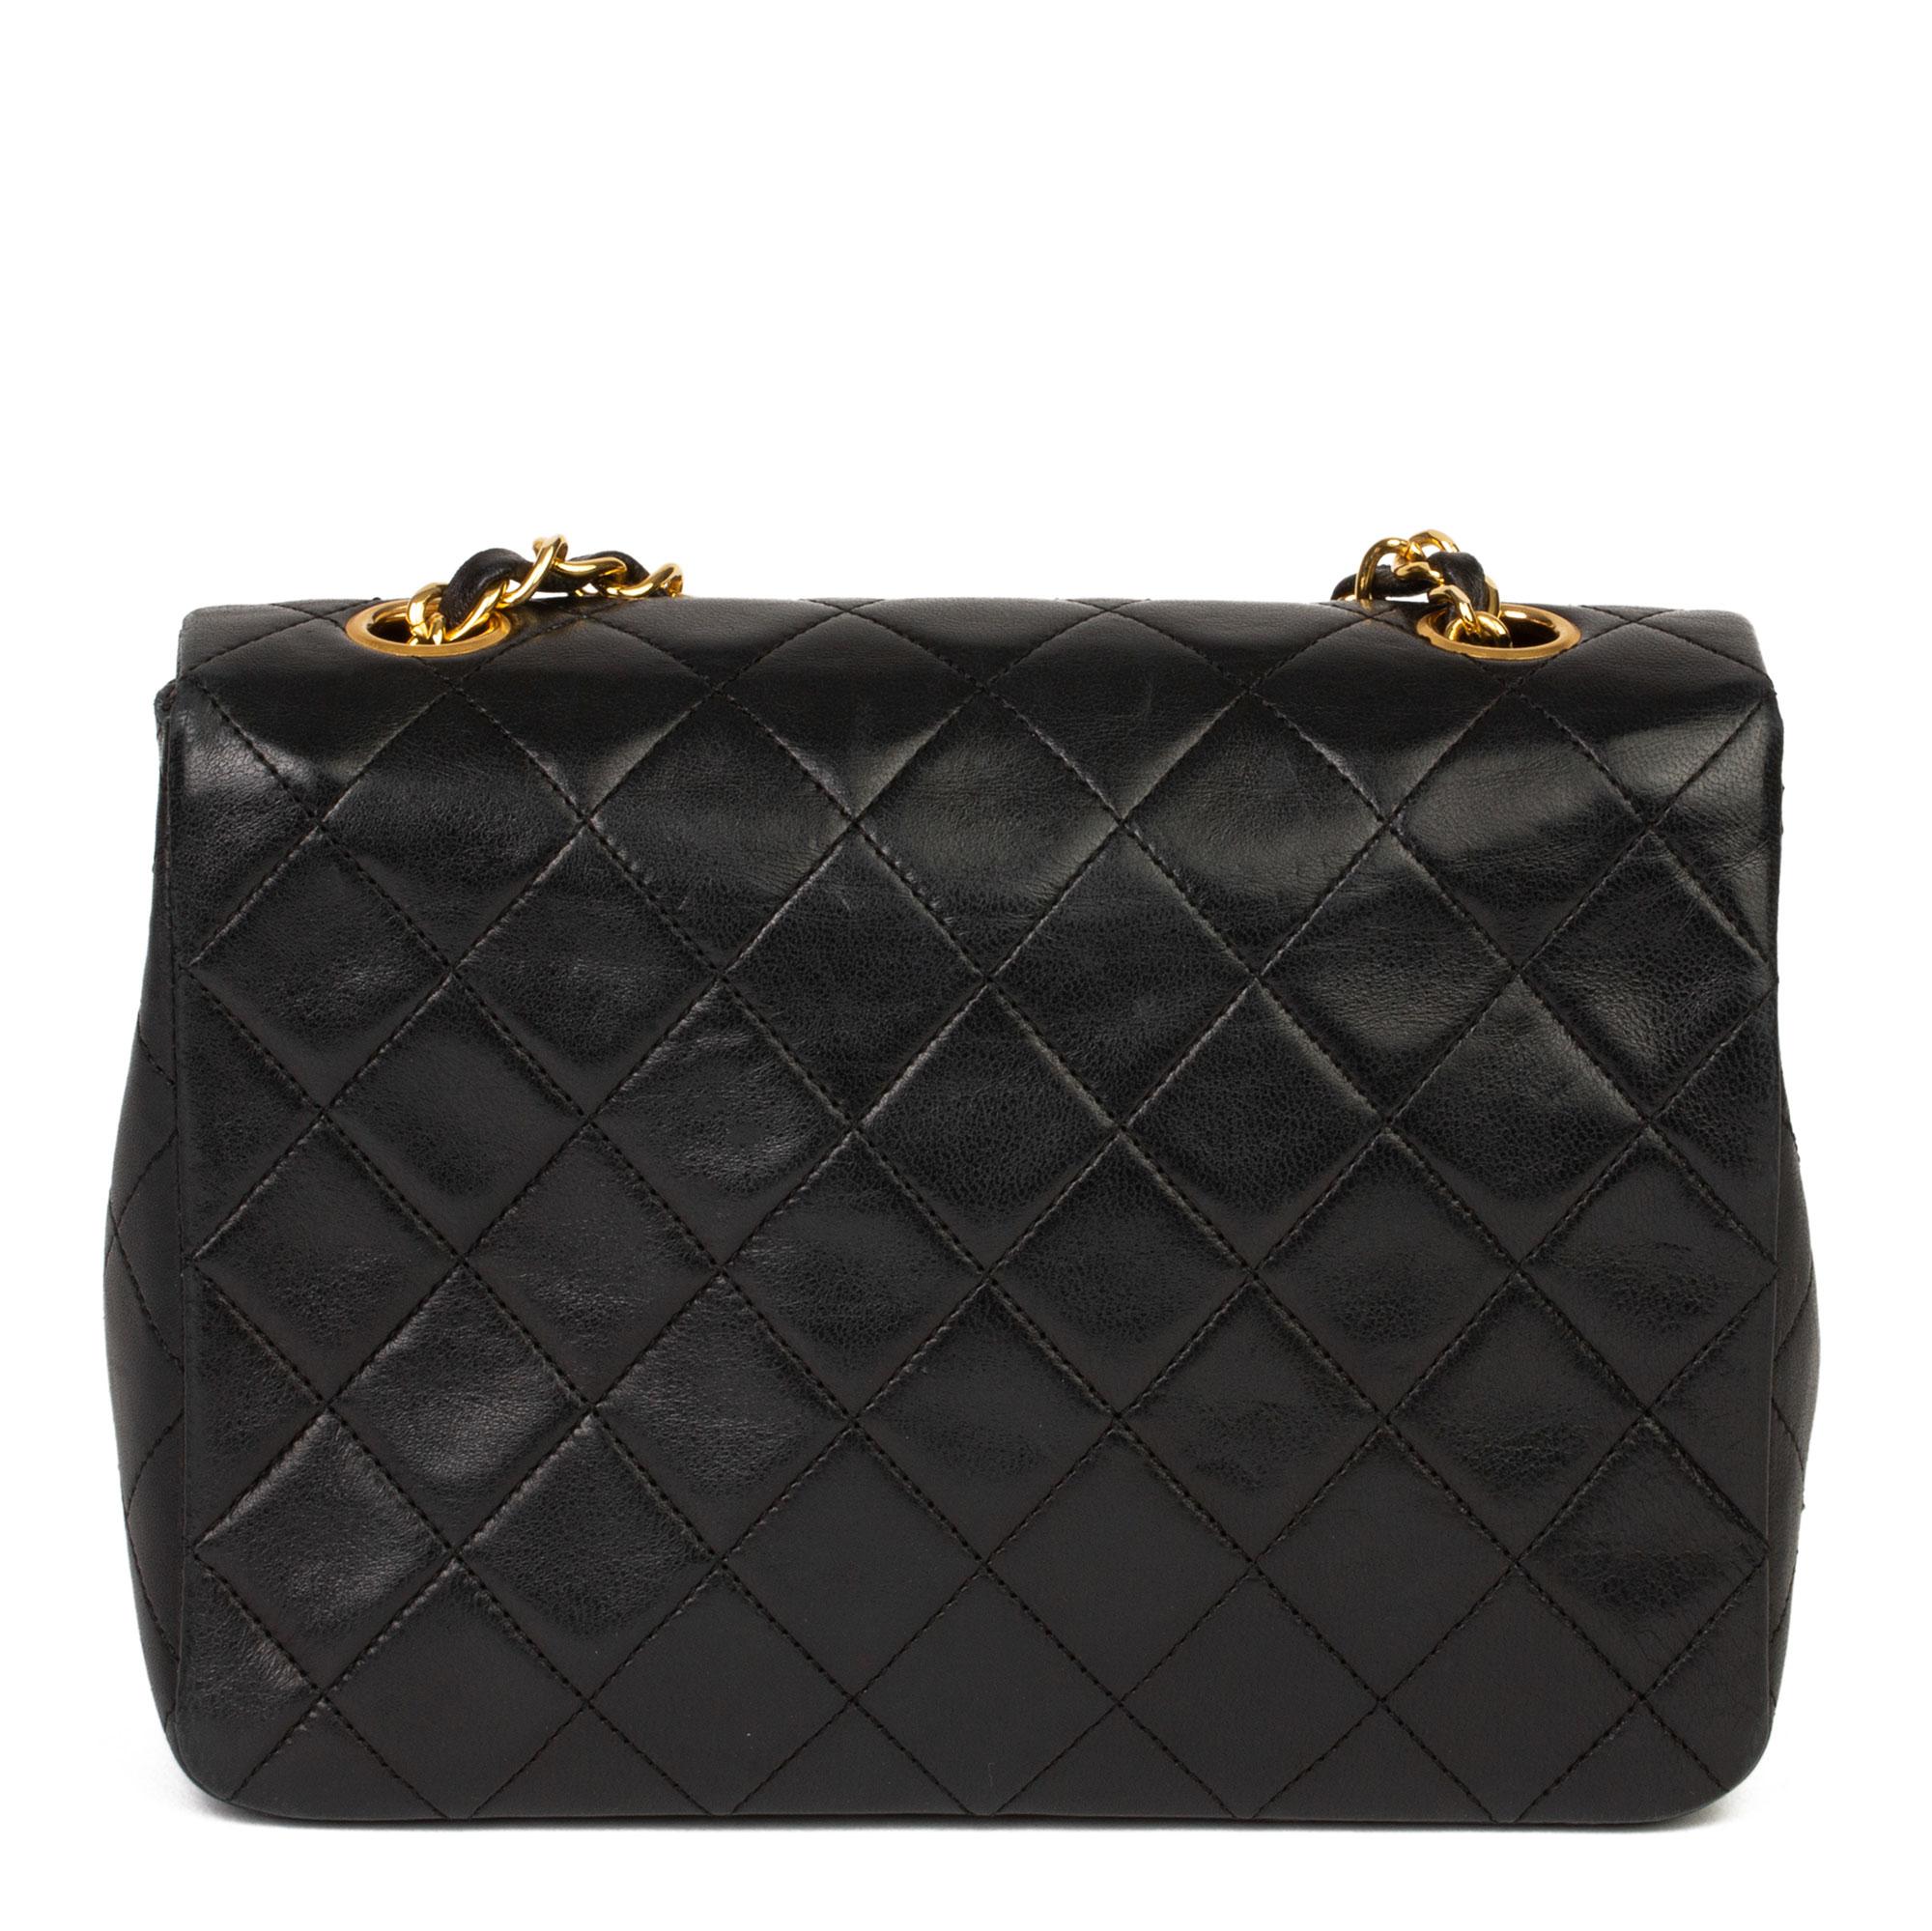 Women's Chanel Black Quilted Lambskin Vintage Mini Flap Bag 